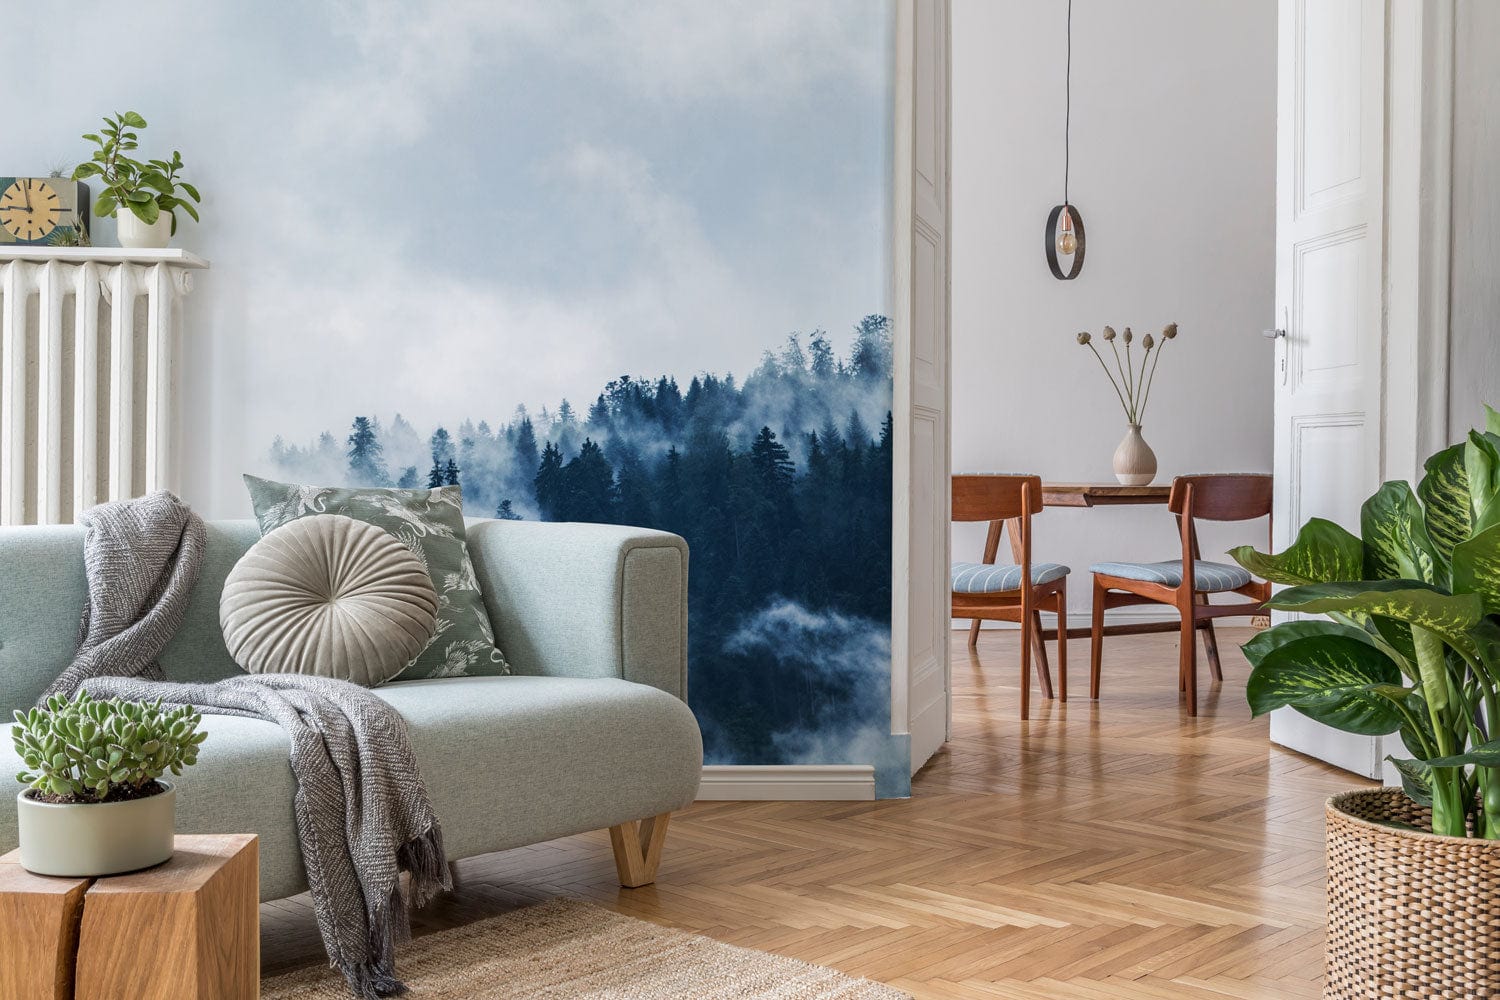 Chillwave in the Scenery of the Forest Wallpaper Mural for the Decoration of the Living Room